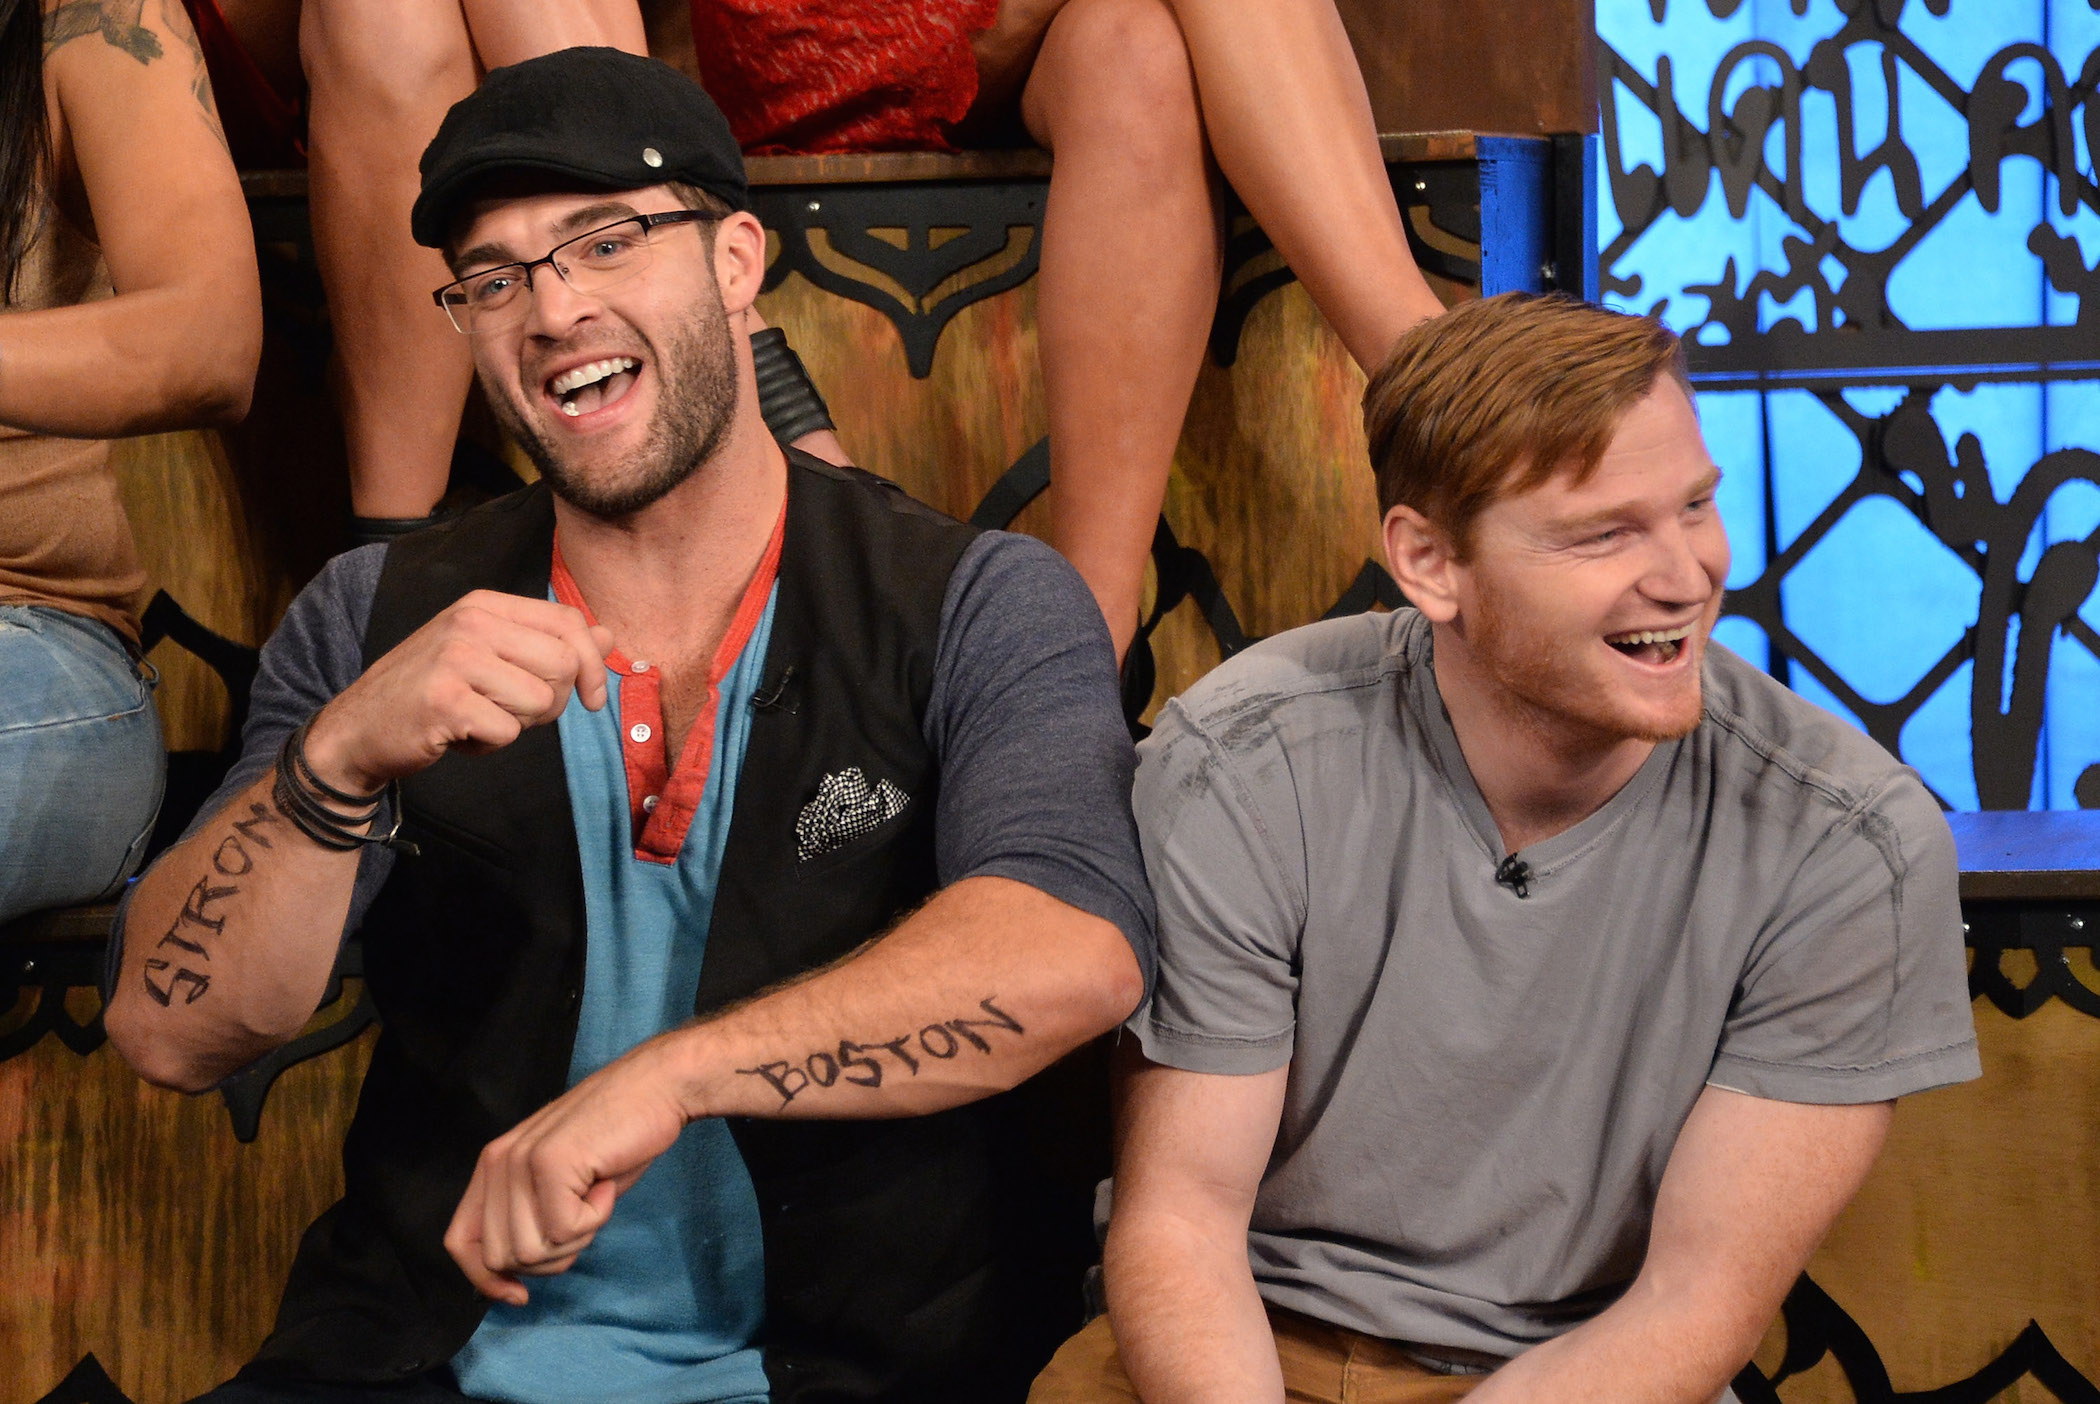 CT Tamburello and Wes Bergmann sitting and laughing together MTV's 'The Challenge' reunion